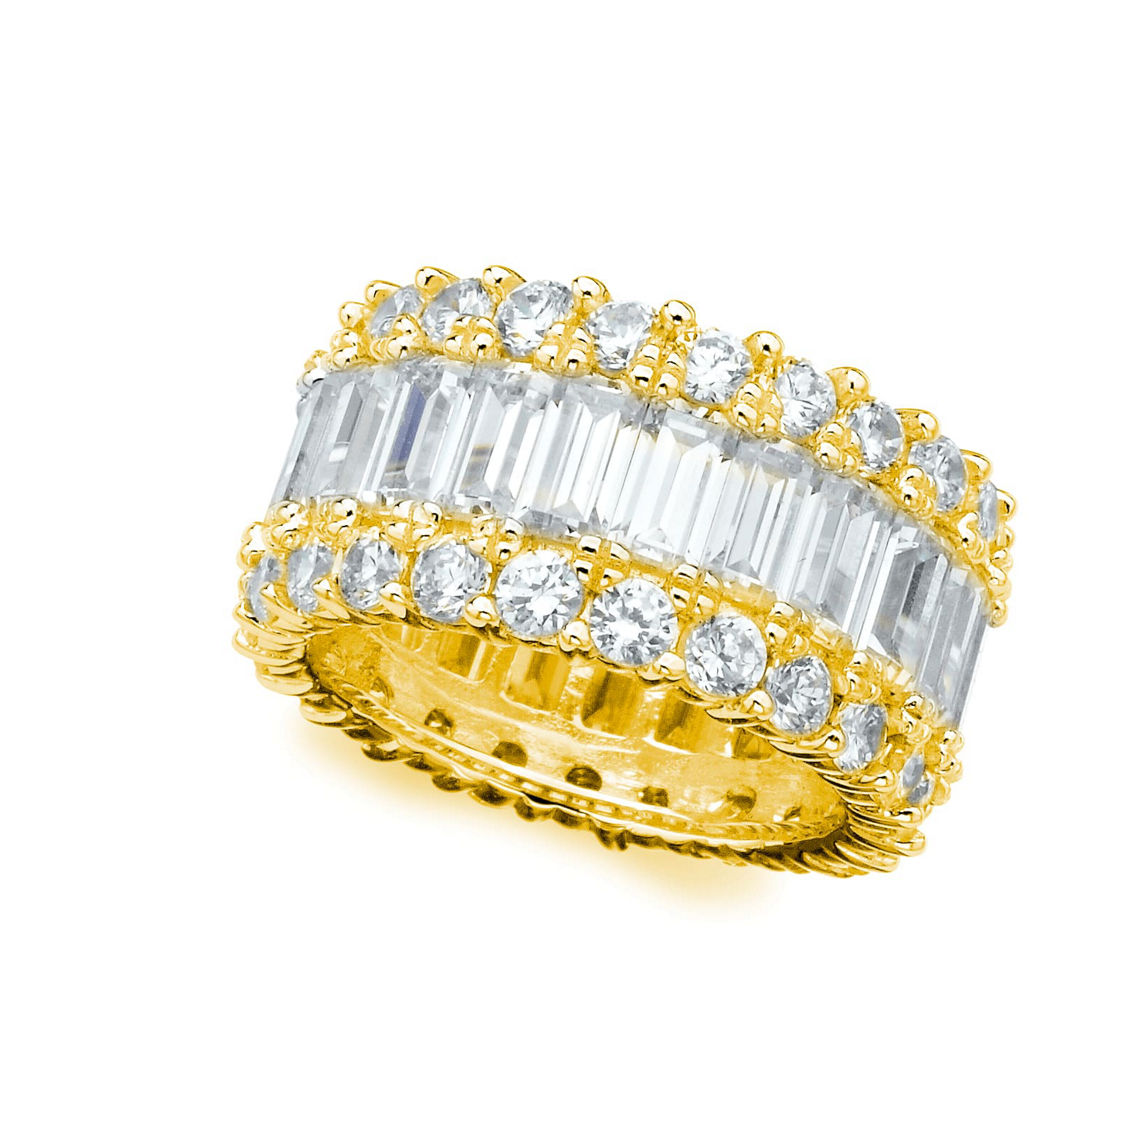 Crislu baguette eternity band finished in 18kt yellow gold - Image 2 of 2